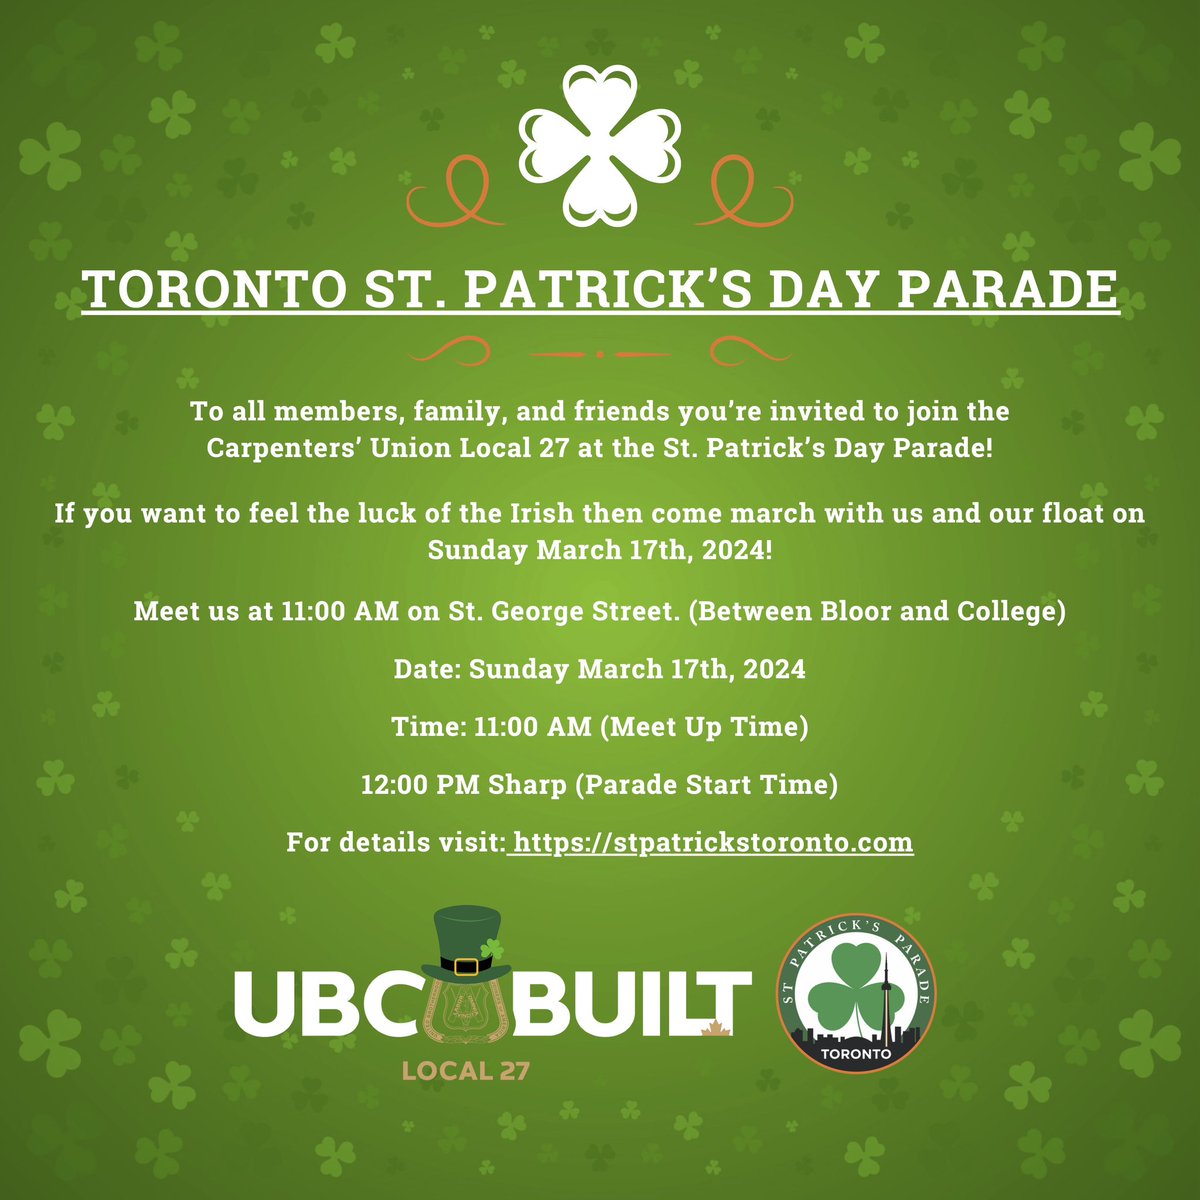 🍀 Toronto St. Patrick’s Day Parade 🍀 To all members, family, and friends you’re invited to join the Carpenters’ Union Local 27 at the St. Patrick’s Day Parade! If you want to feel the luck of the Irish then come march with us and our float on Sunday March 17th, 2024! 🇮🇪